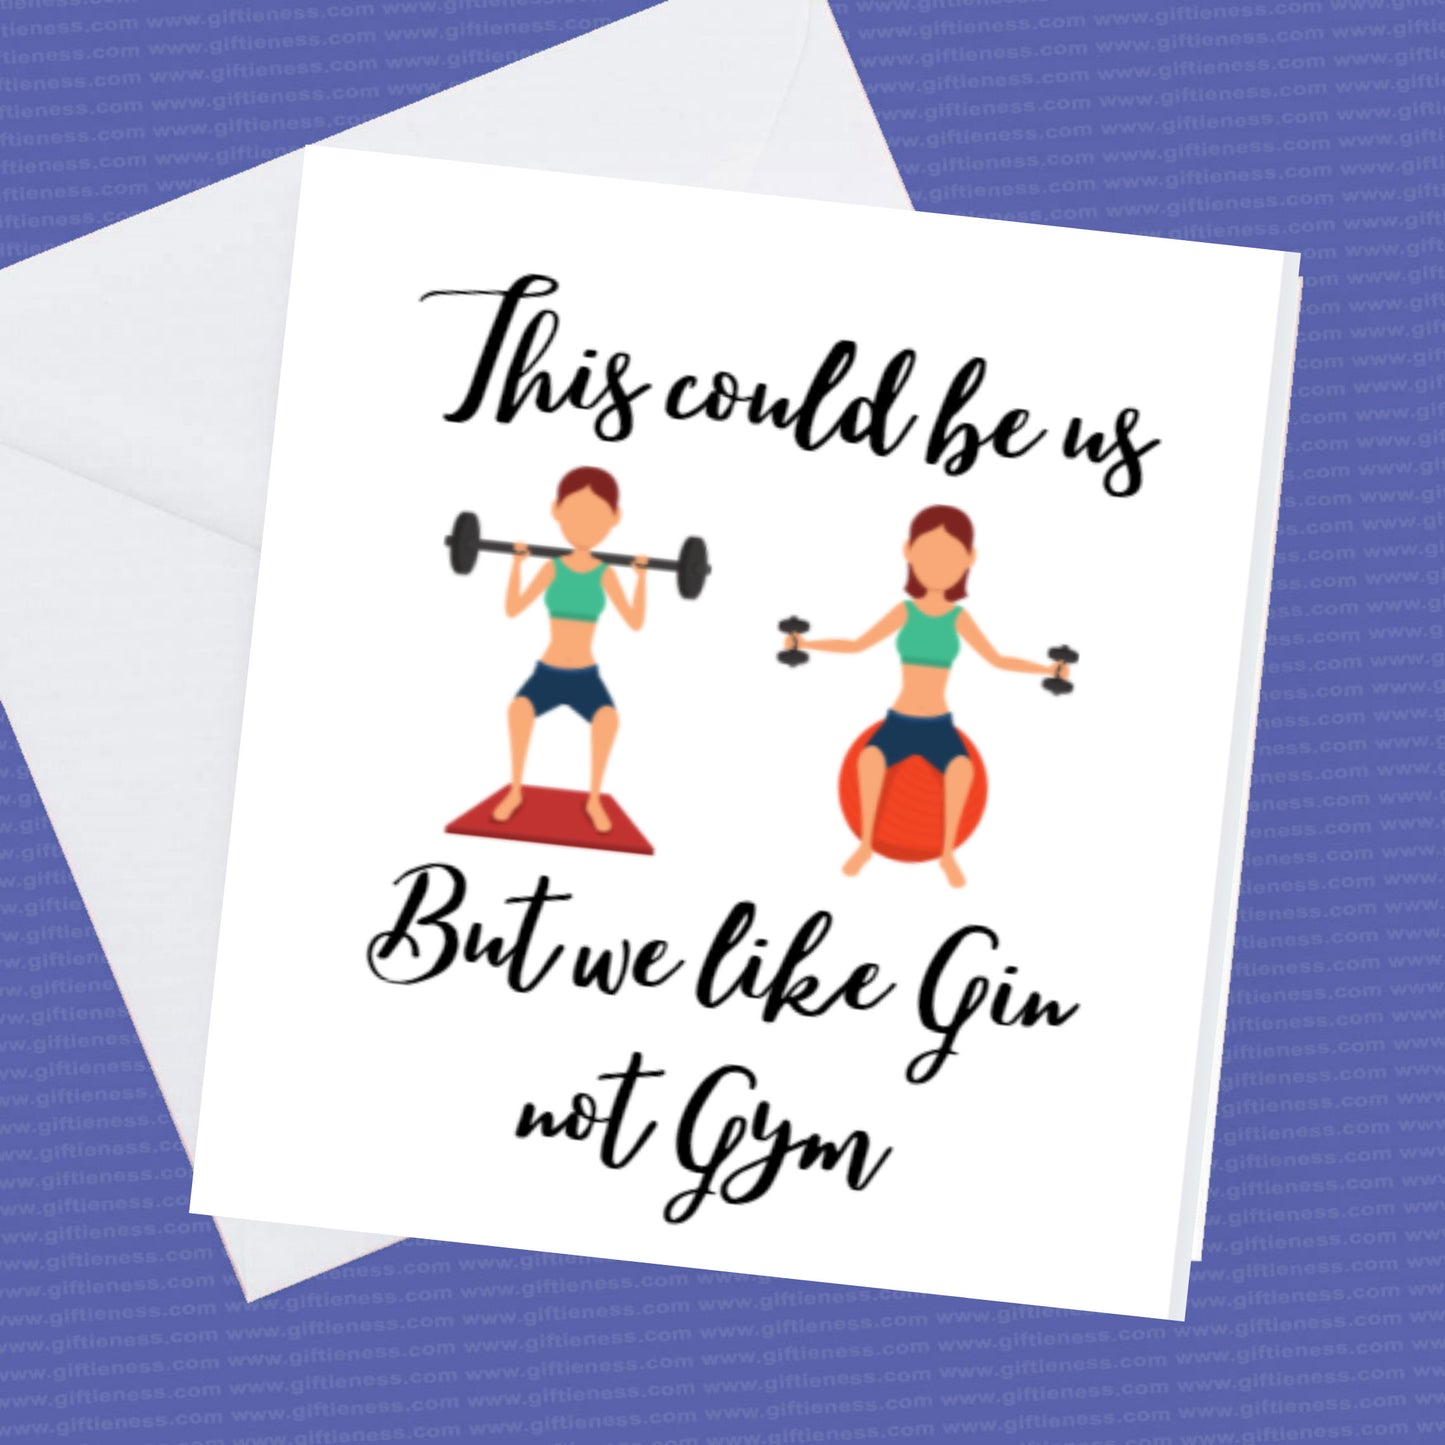 Birthday Card- This could be us but we like Gin not Gym